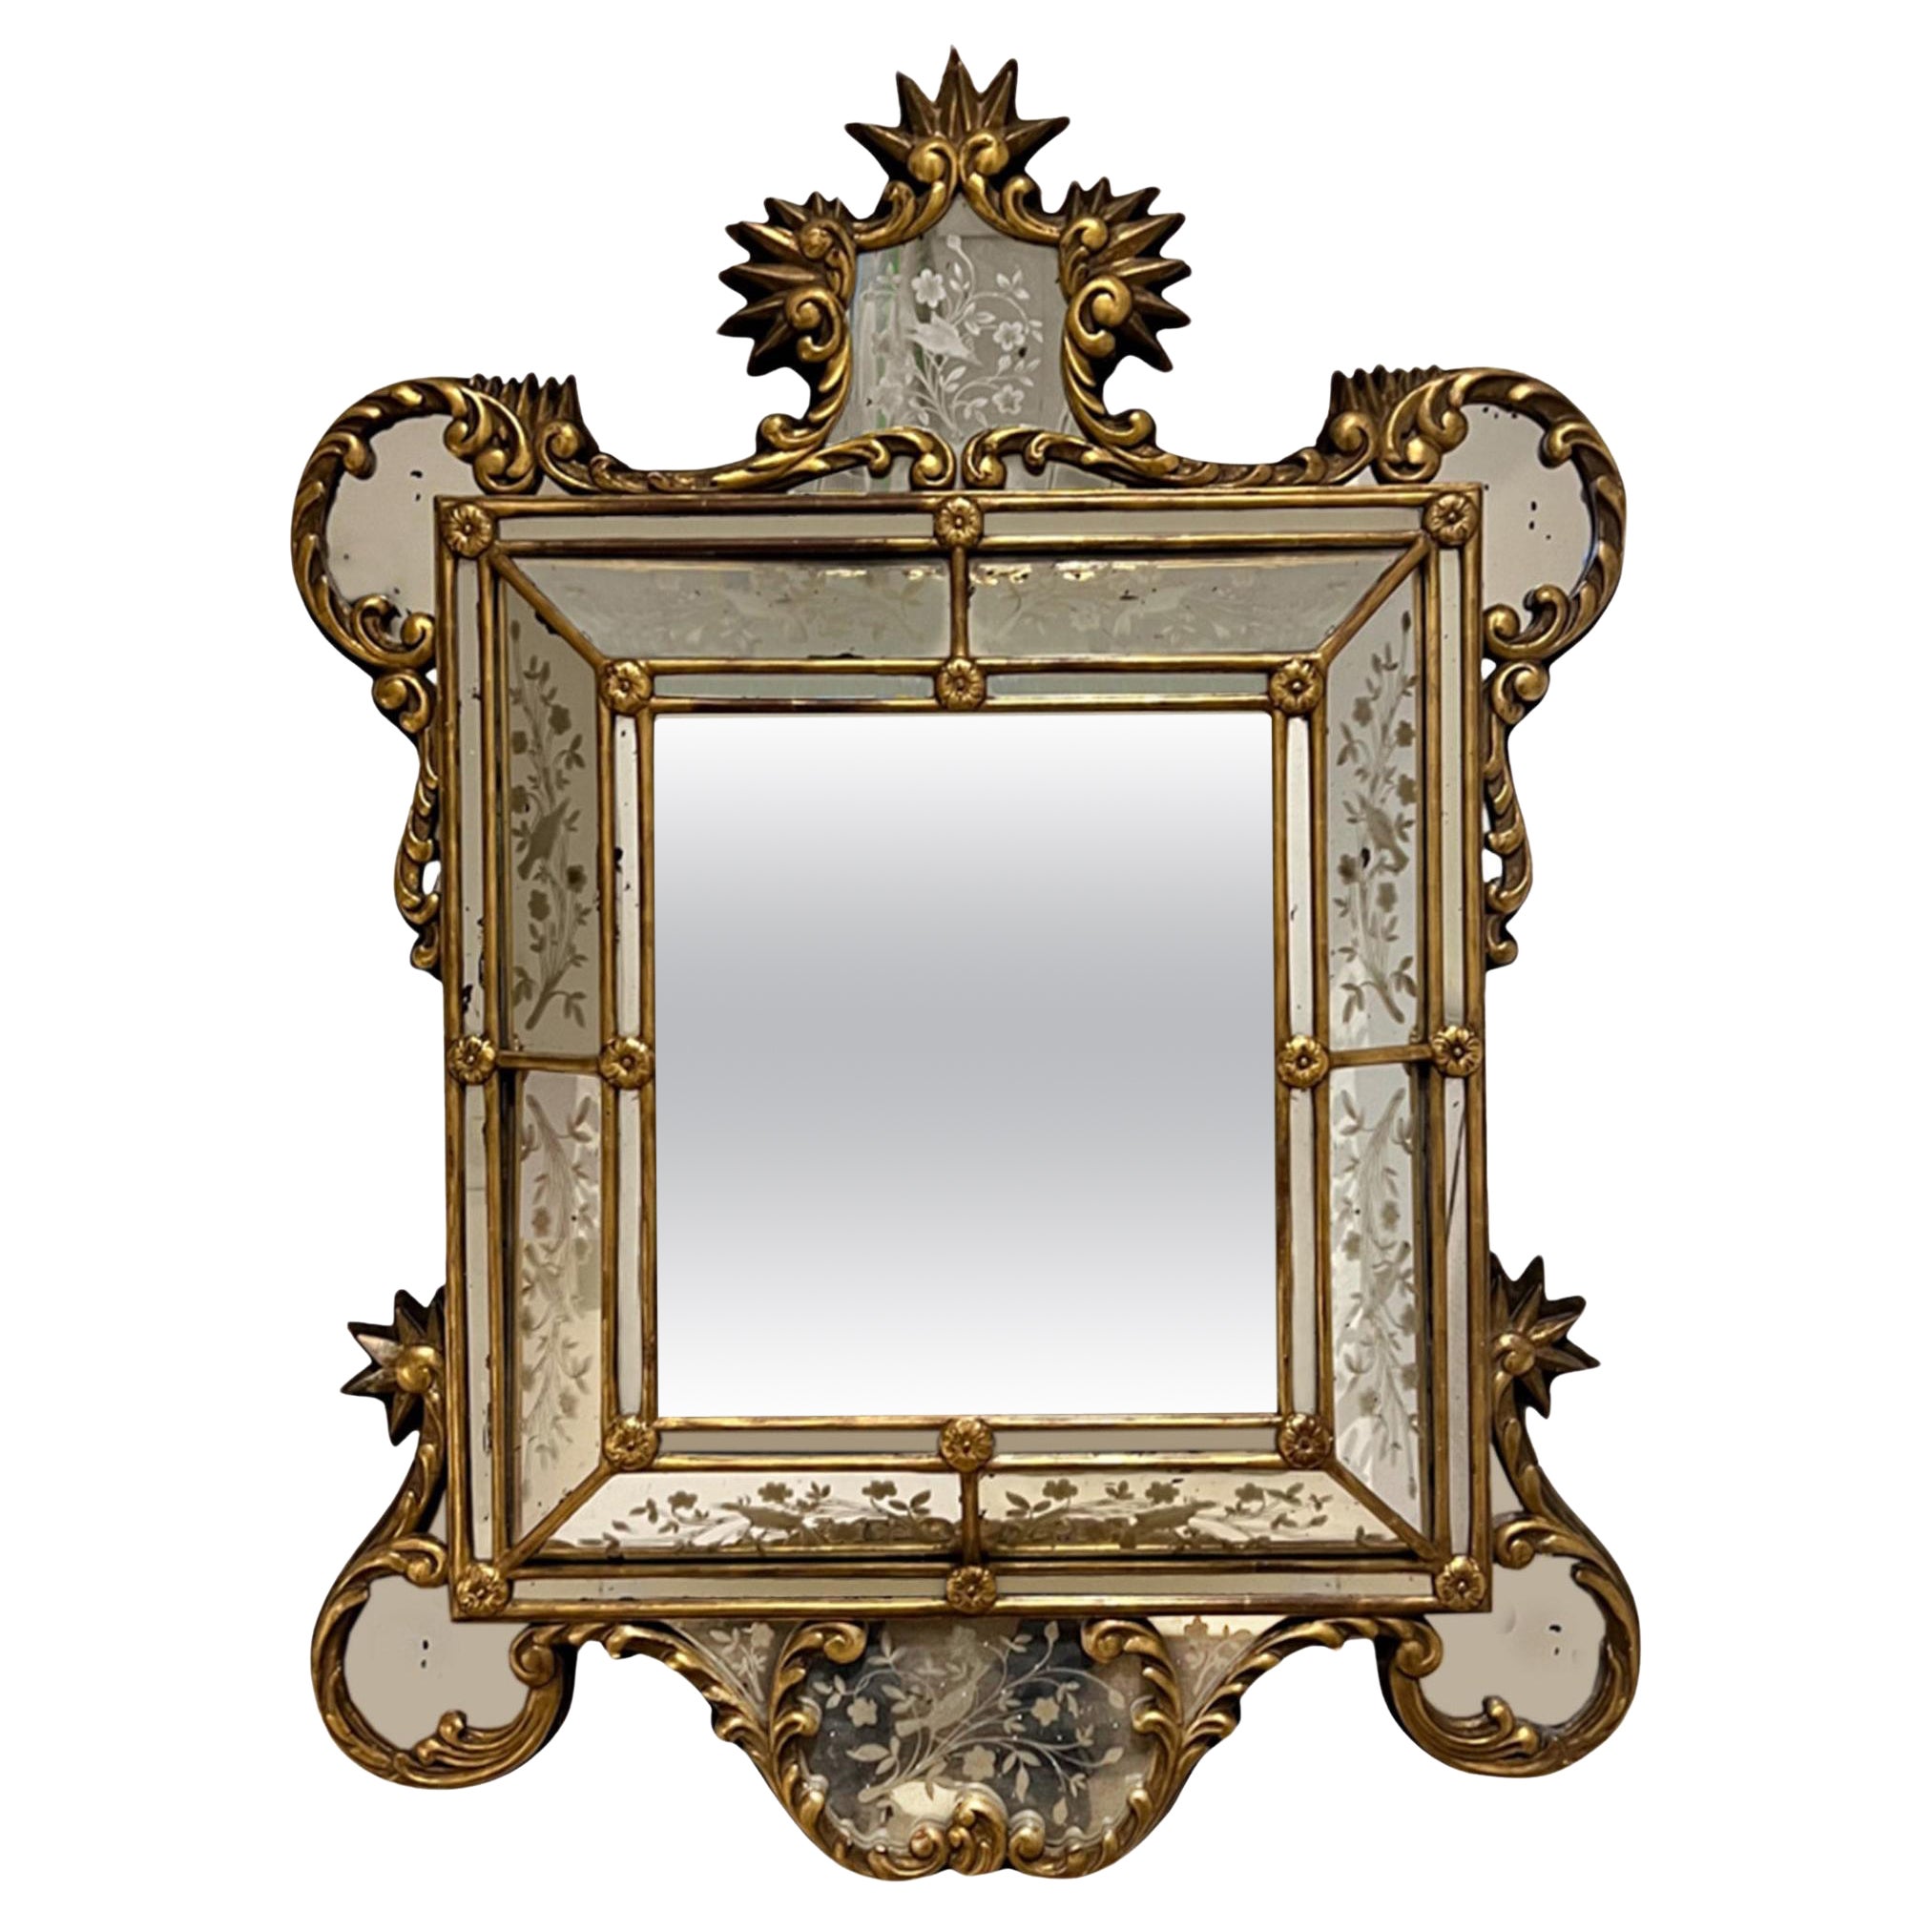 Italian Early 20th Century Giltwood Cushion Mirror With Etched Glass